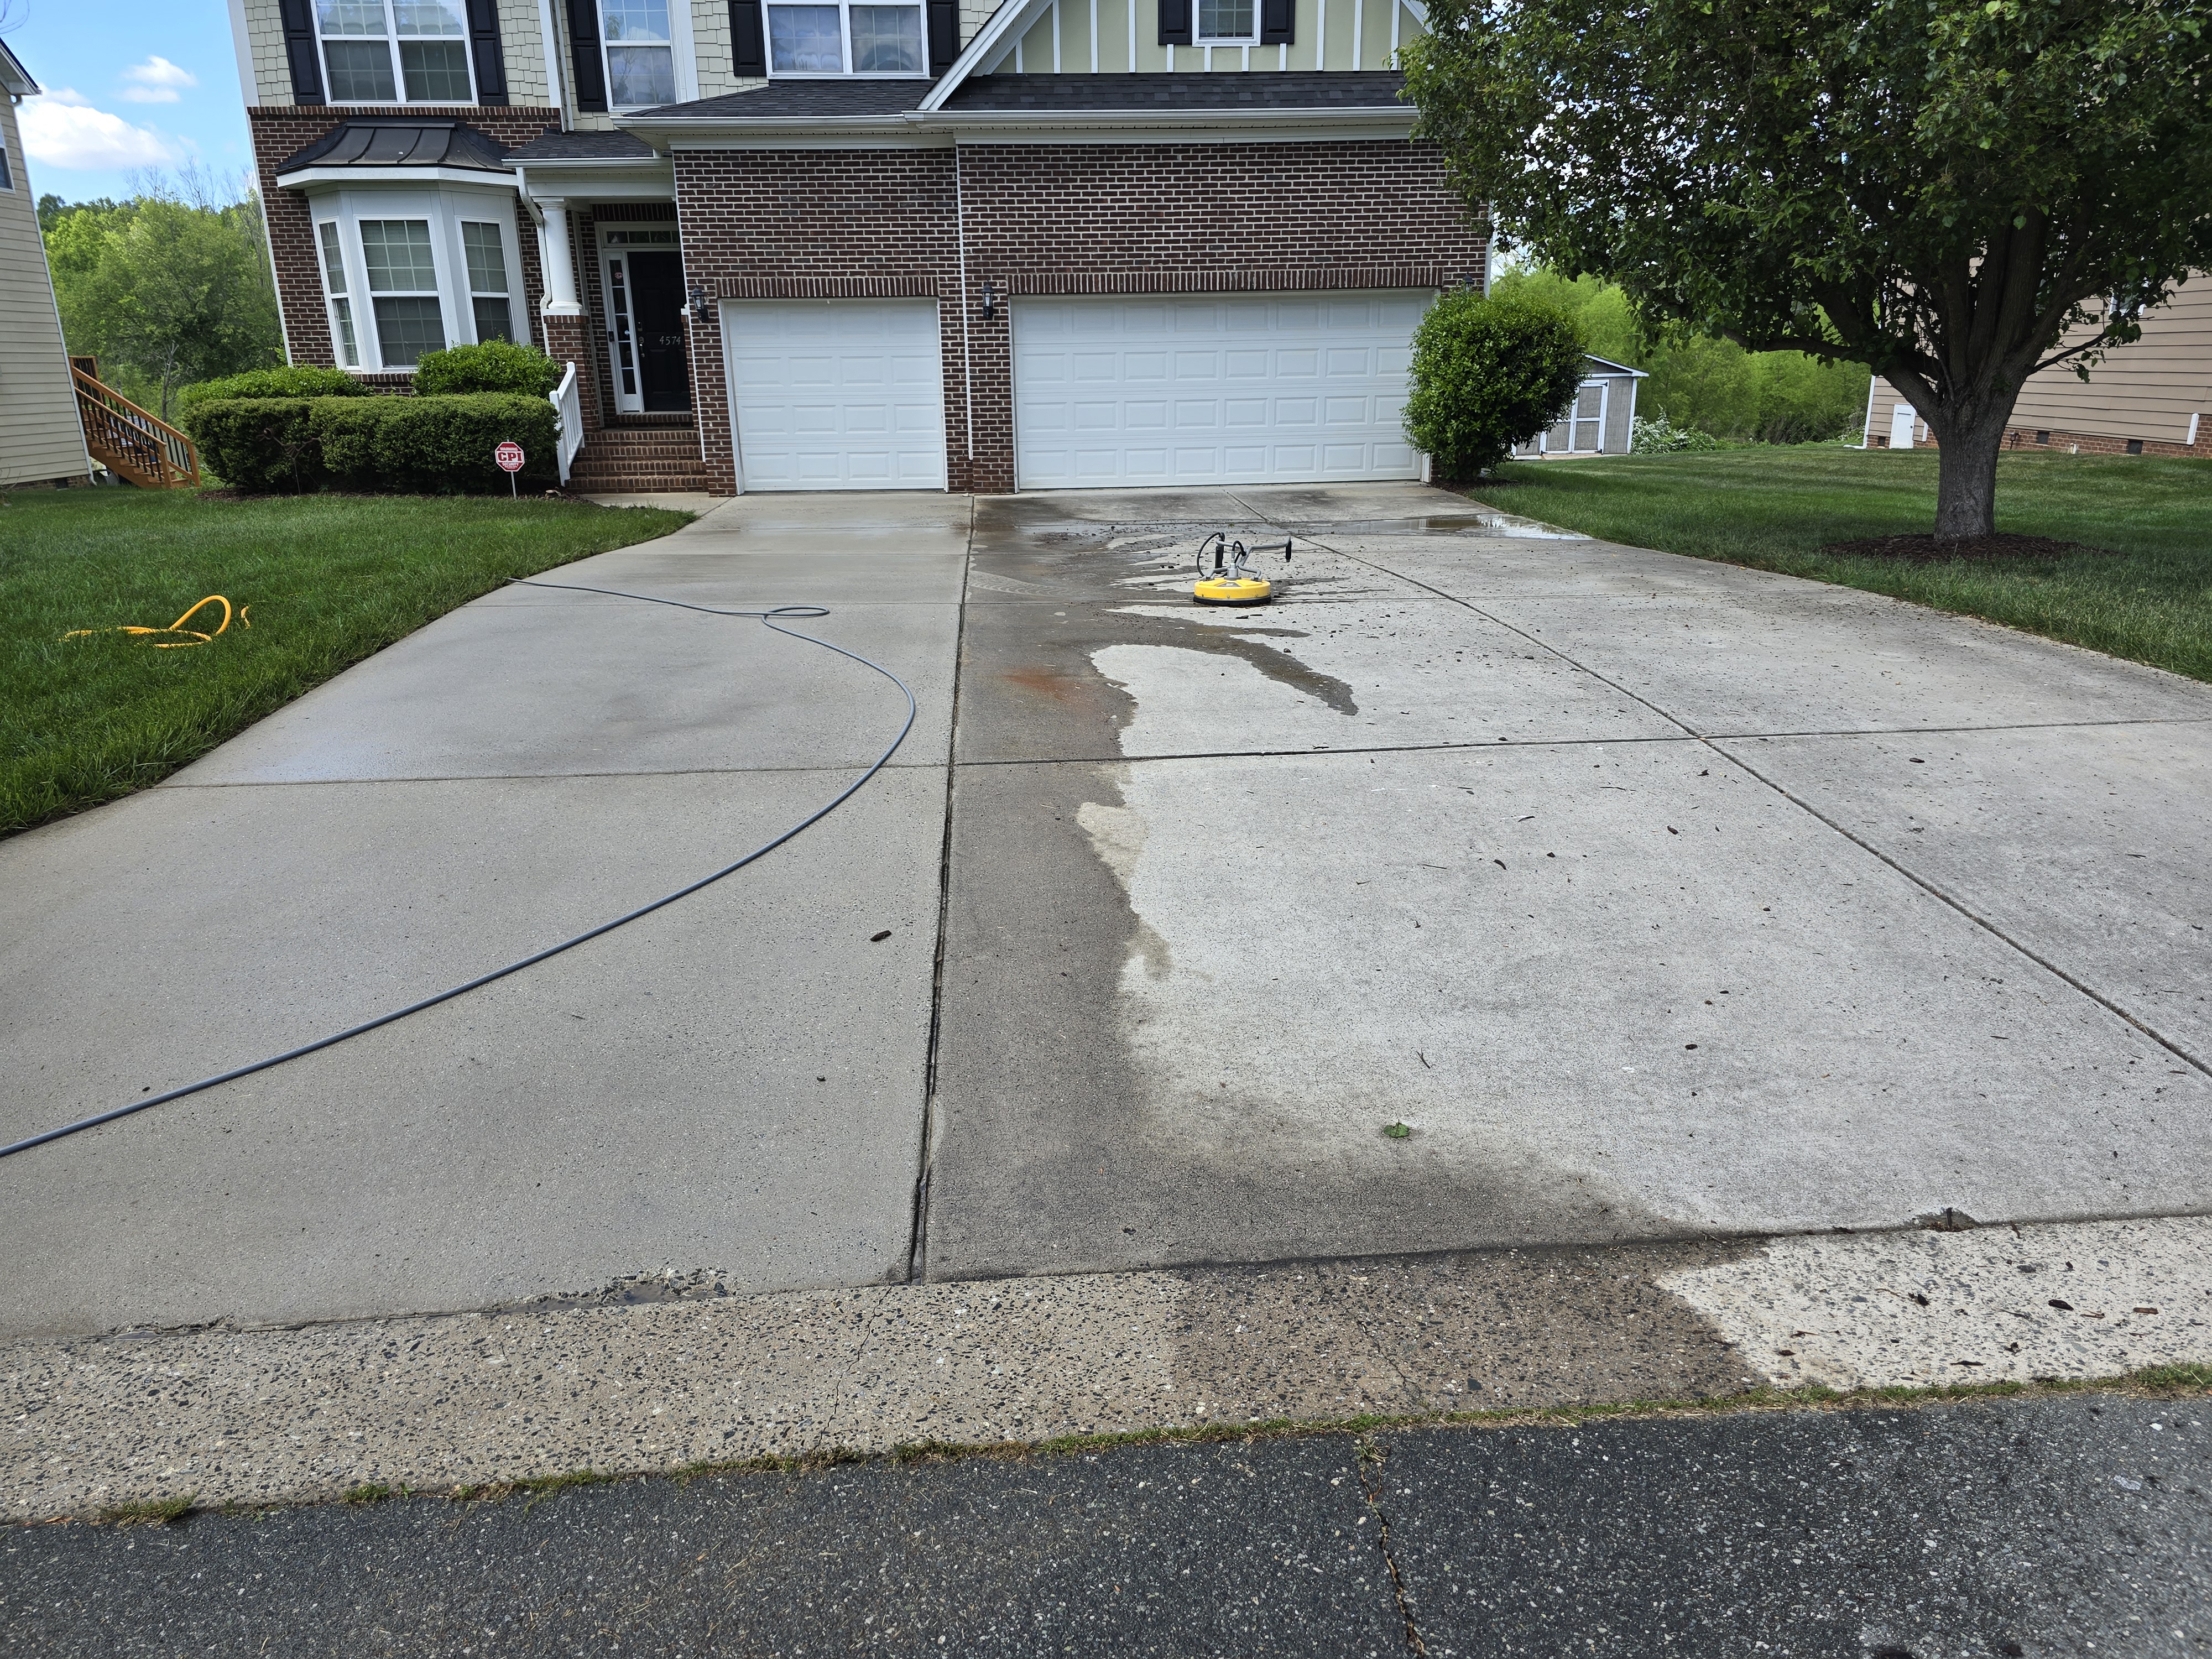 Top quality driveway cleaning in Greensboro NC.